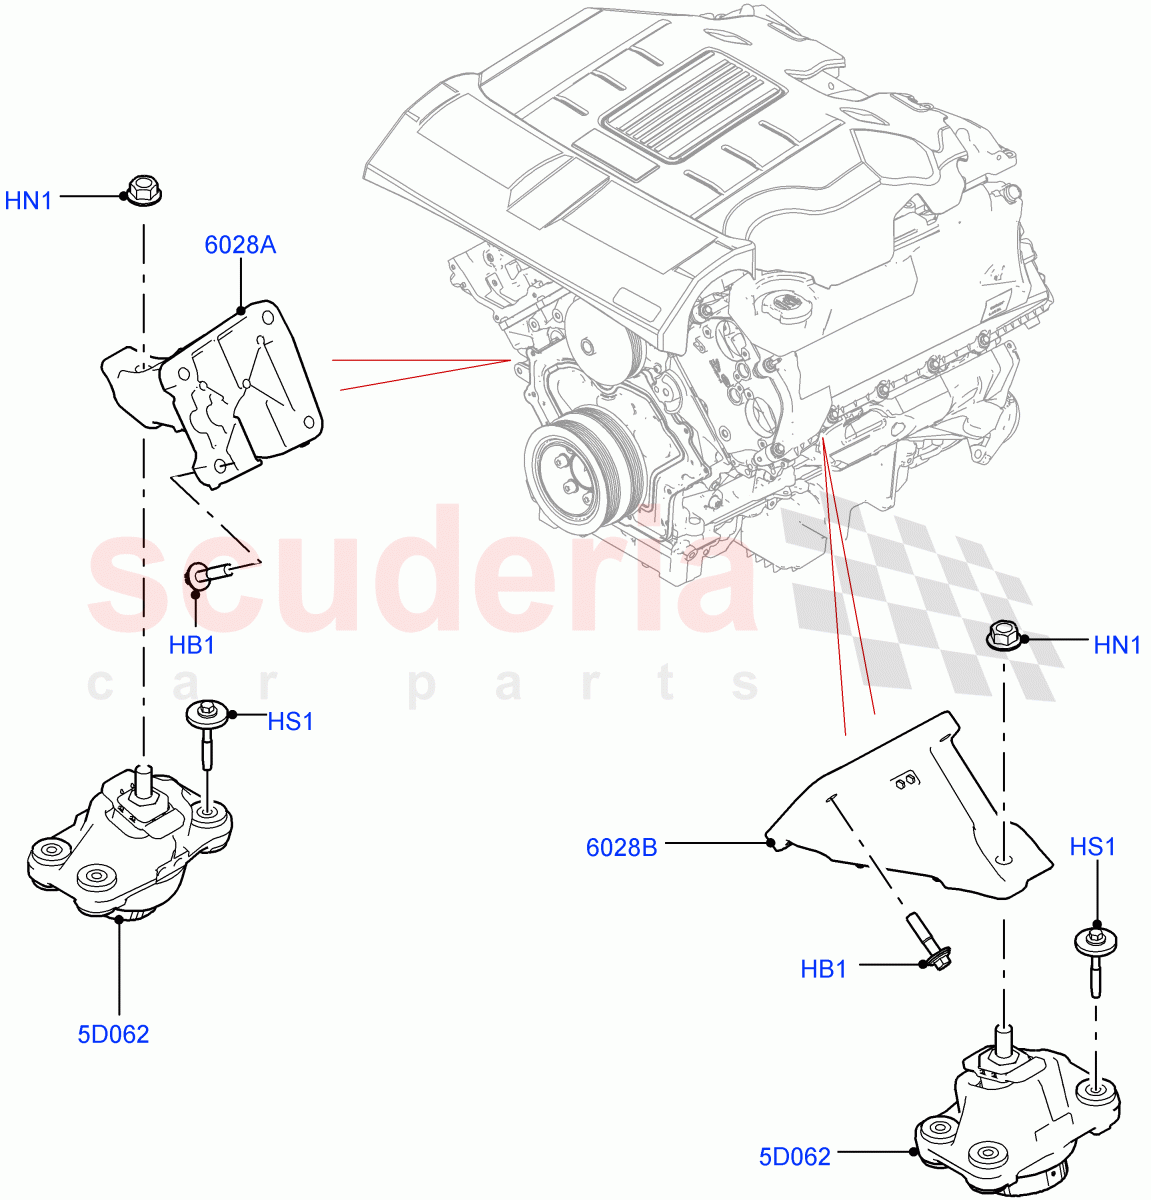 Engine Mounting(Nitra Plant Build)(3.0L DOHC GDI SC V6 PETROL)((V)FROMK2000001) of Land Rover Land Rover Discovery 5 (2017+) [2.0 Turbo Petrol AJ200P]